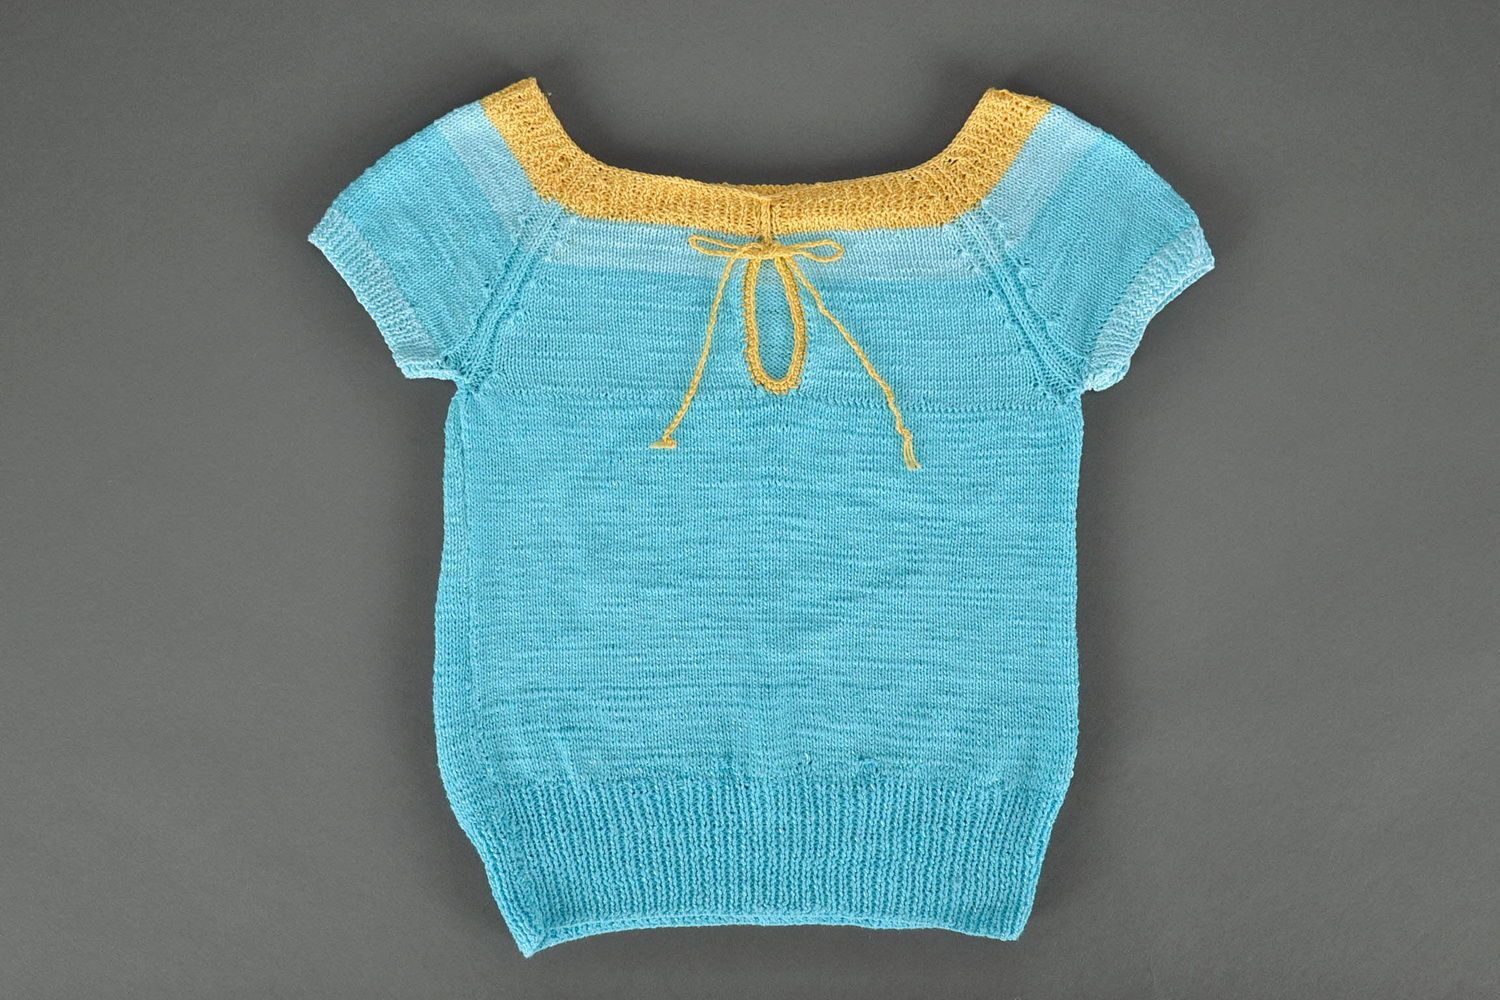 Children's sweater knitted with needles photo 2